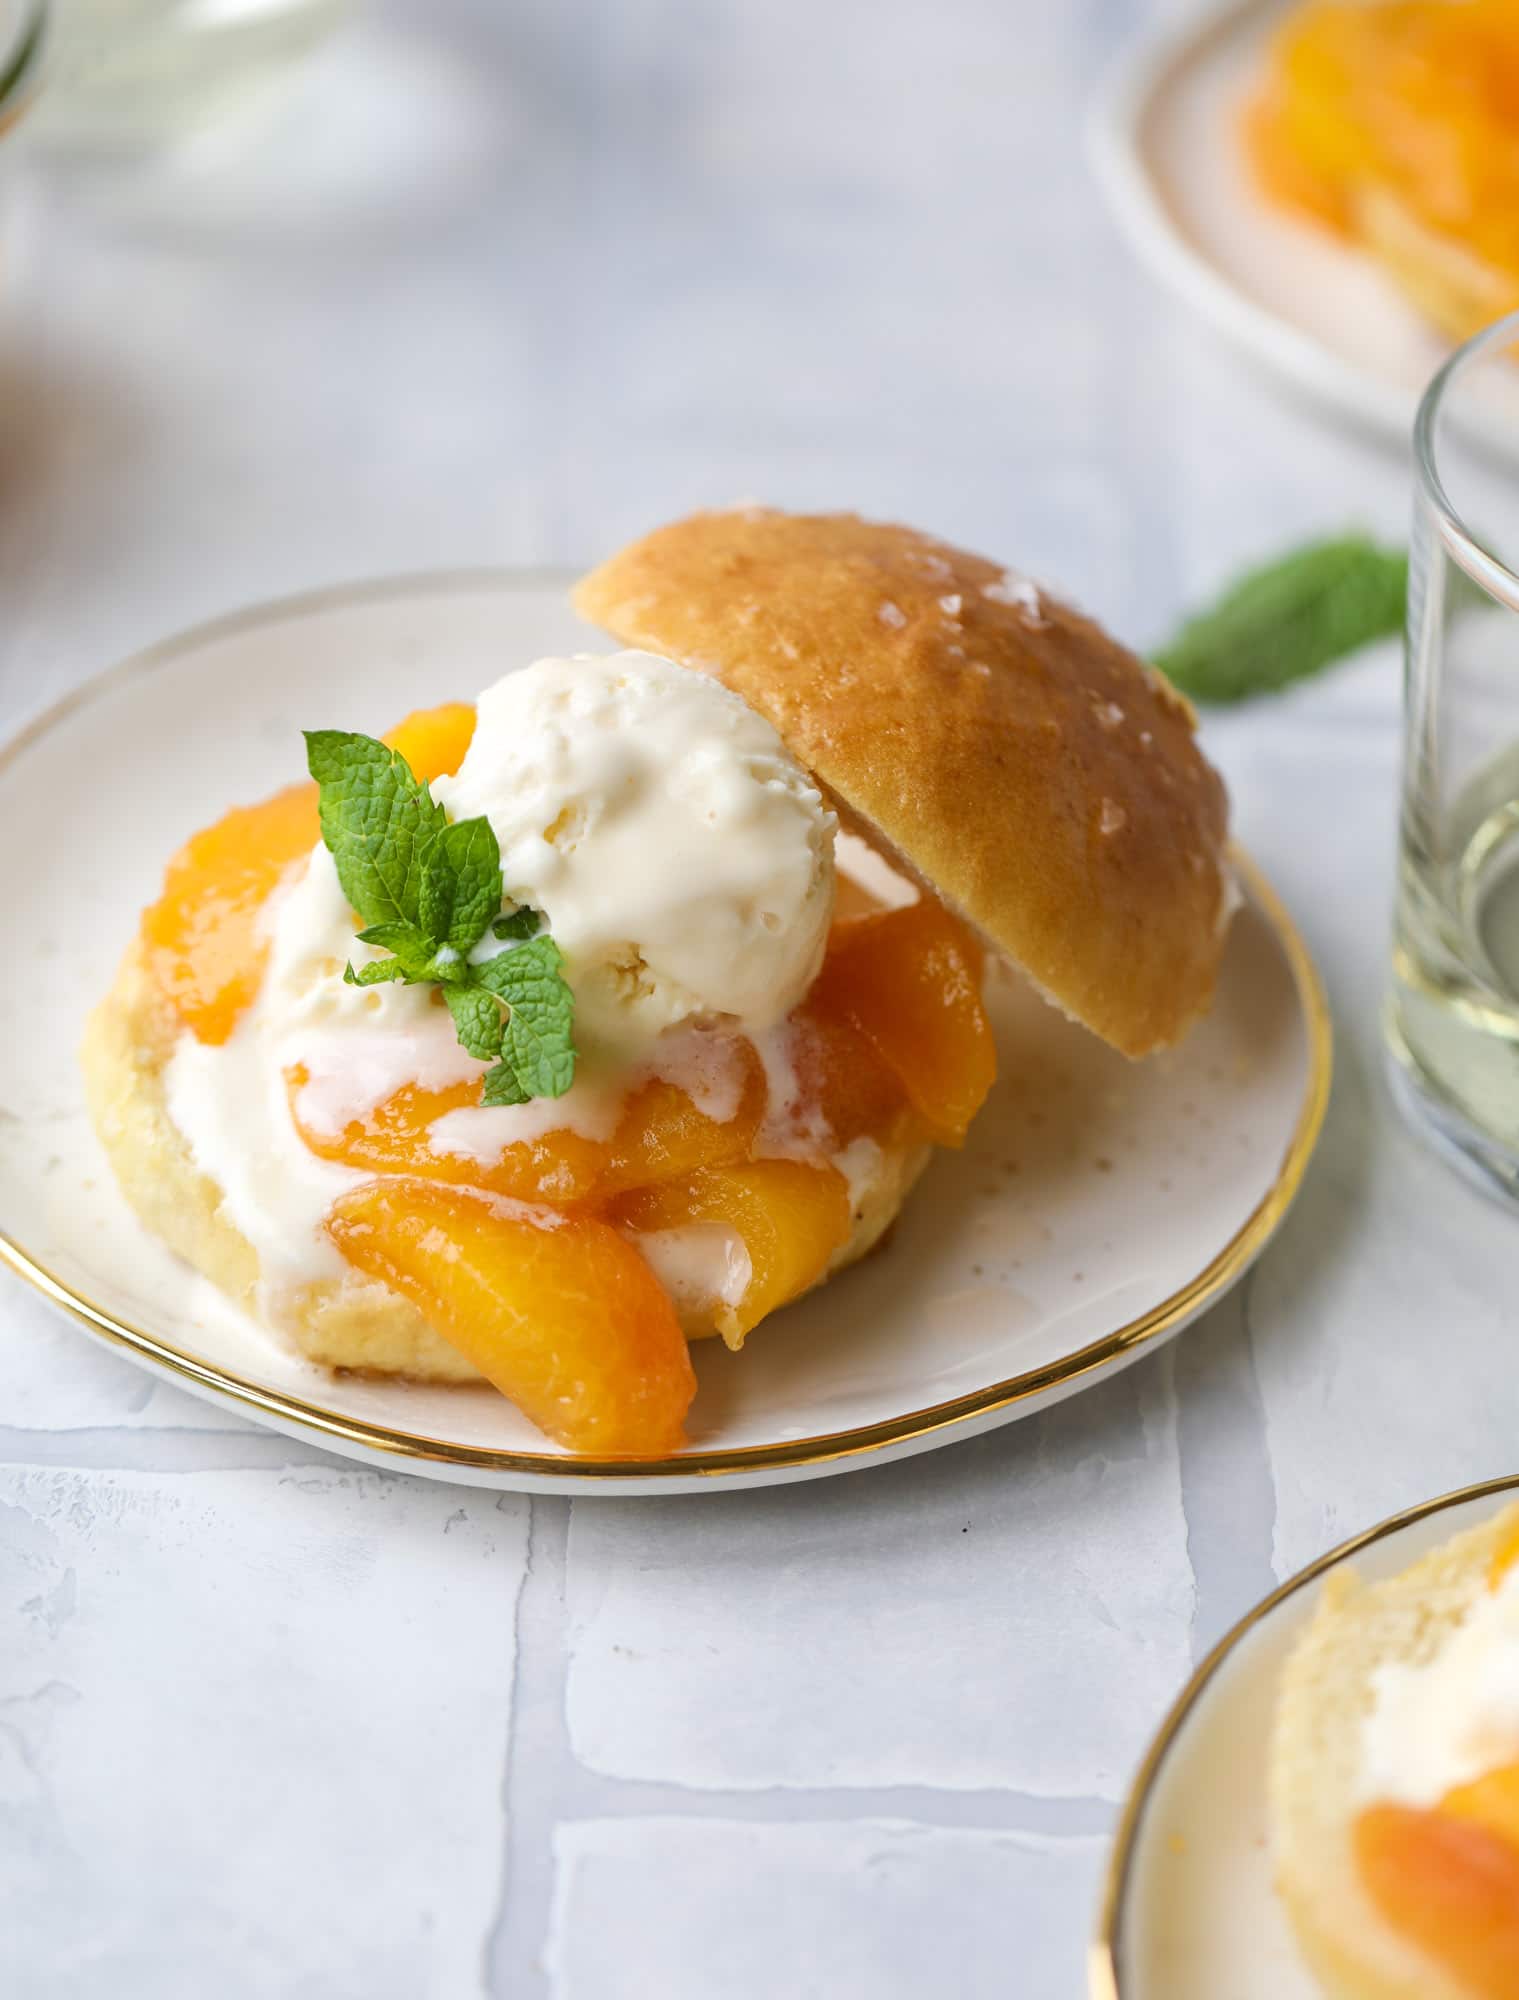 Prosecco peach shortcakes are out of these world! Prosecco poached peaches with vanilla ice cream on homemade salted brioche buns. To die for.